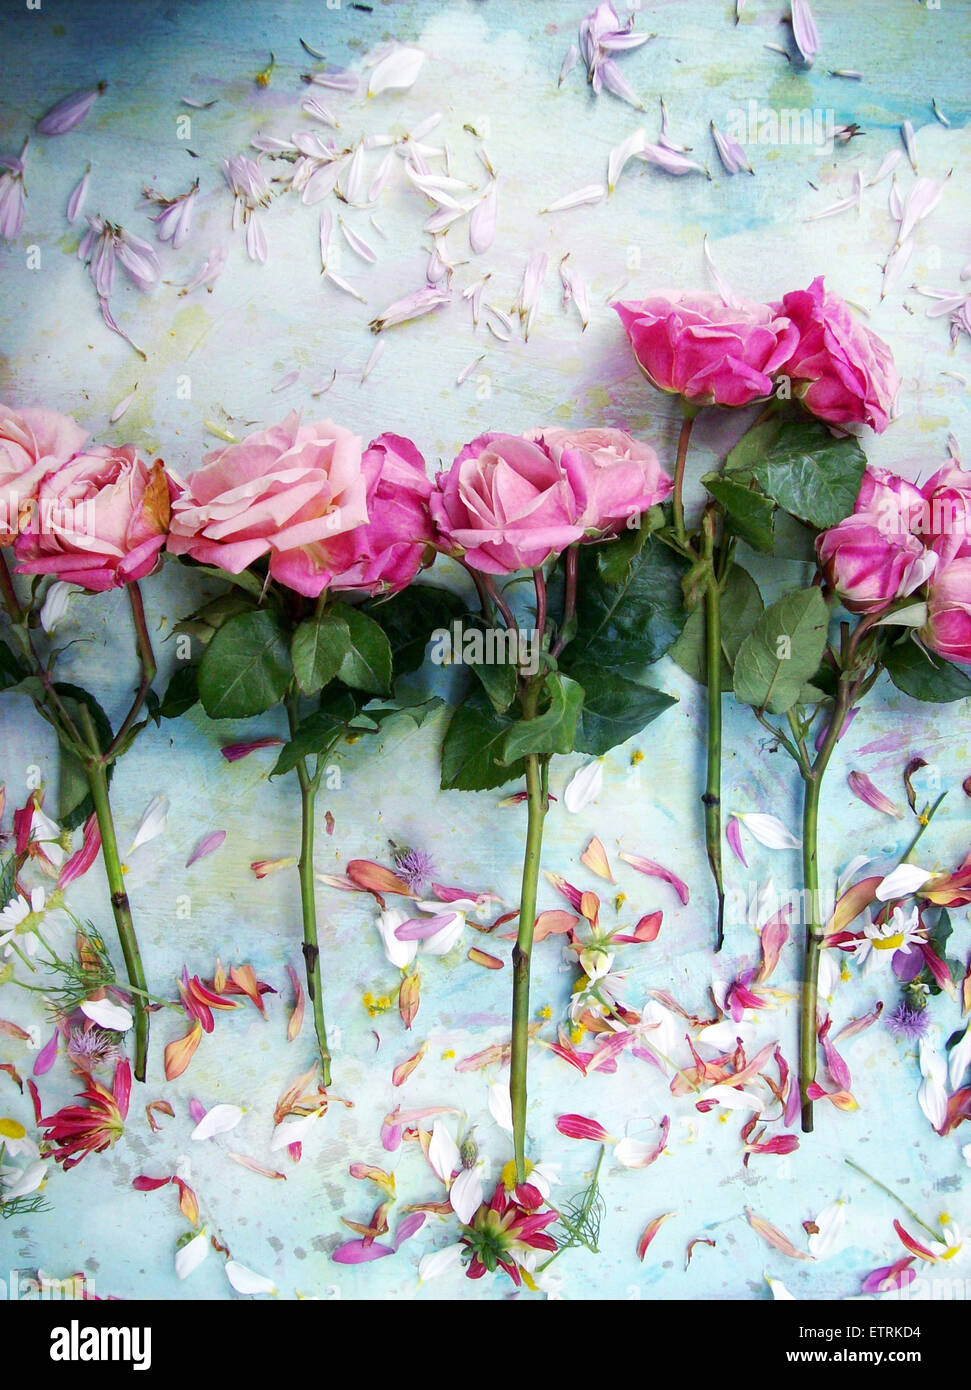 a poetic floral montage of roses, Stock Photo